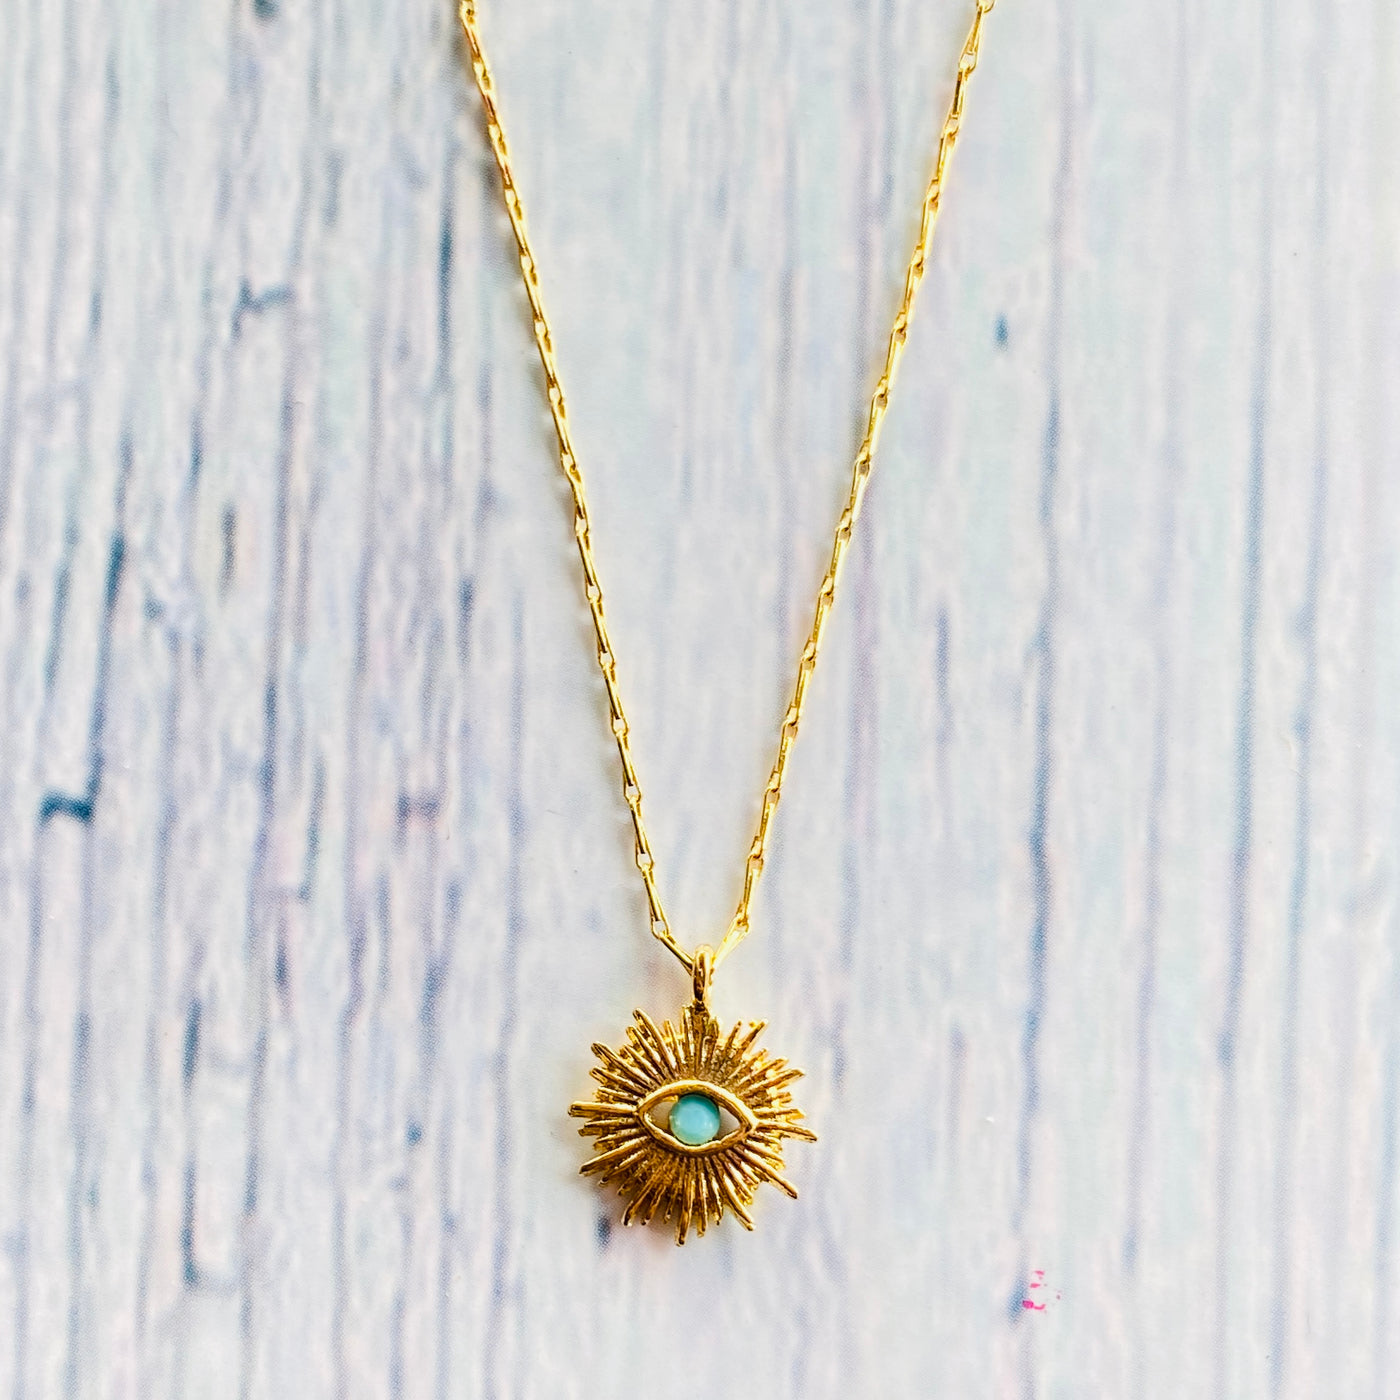 Gold plated brass evil eye protection necklace.